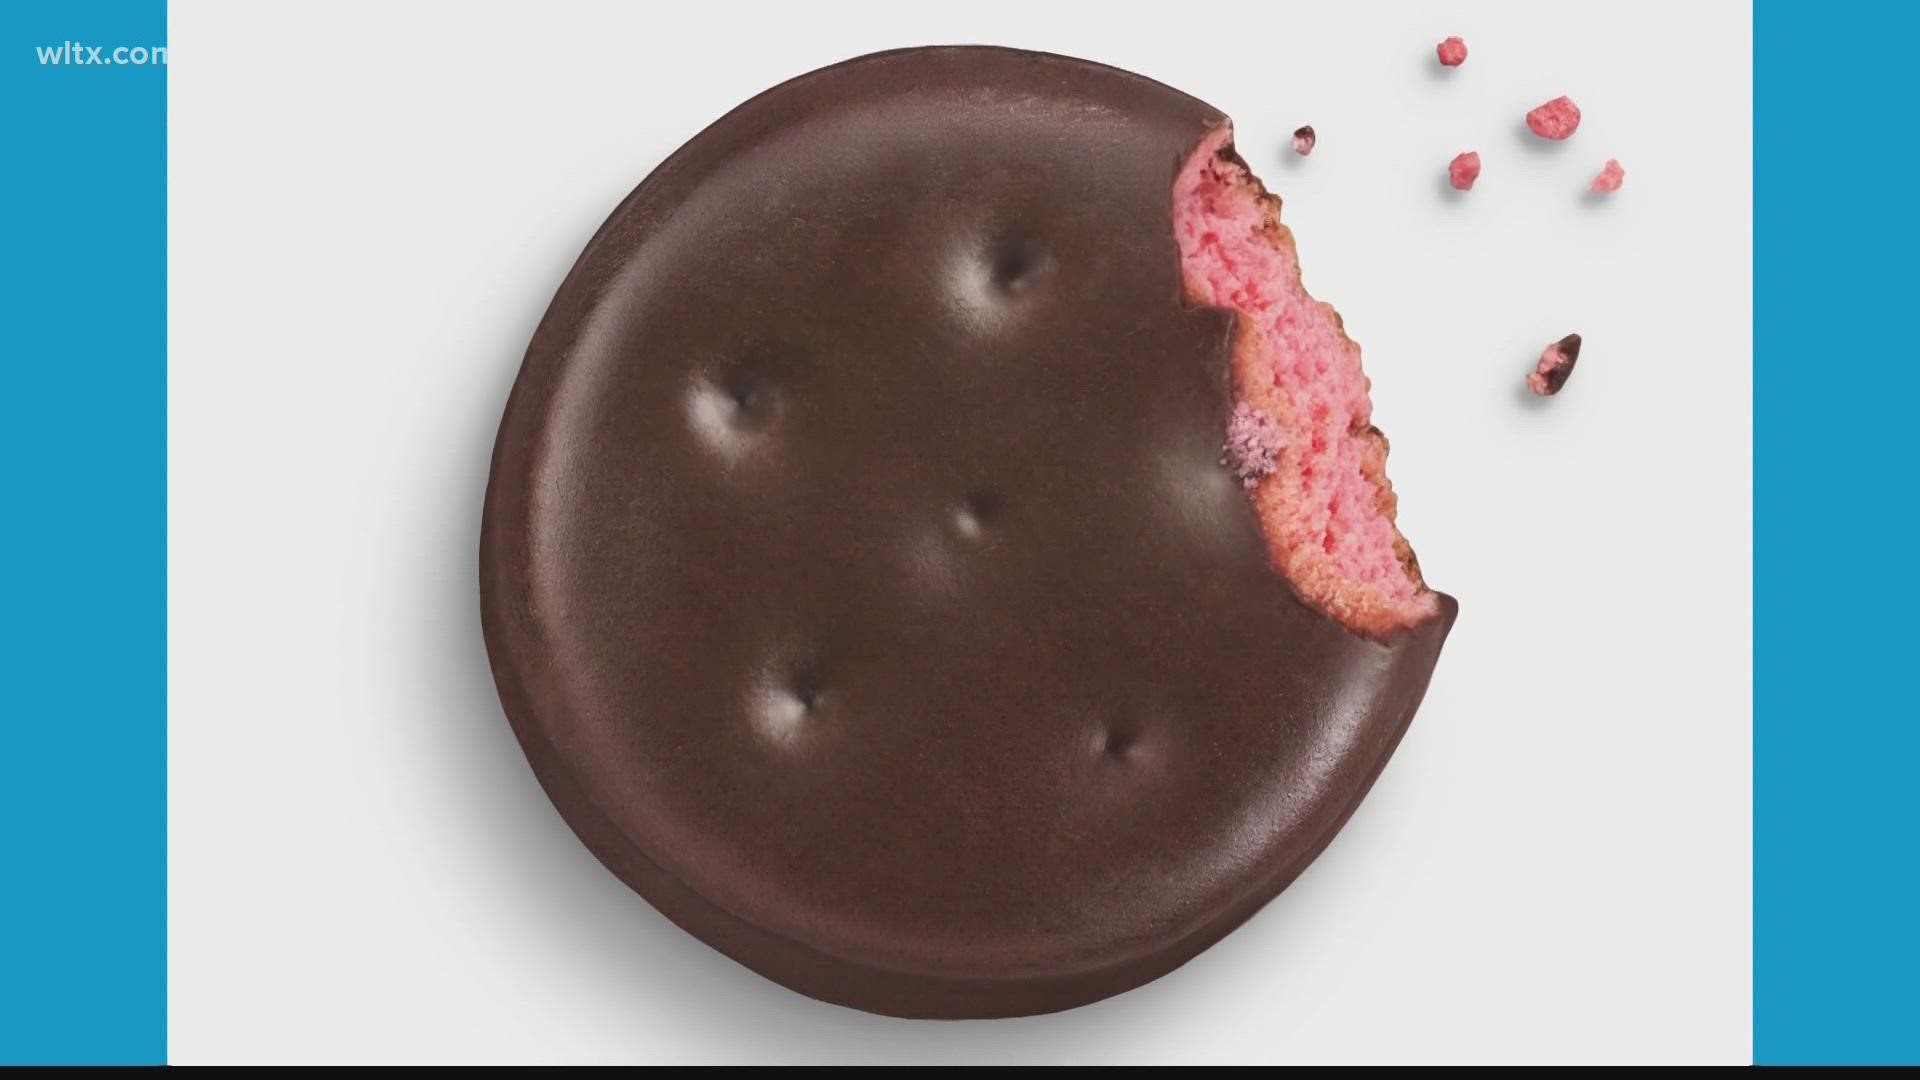 The new Raspberry Rally cookie is a "sister" to the iconic Thin Mint cookie, with raspberry filling instead of mint and dipped in the same chocolate coating.